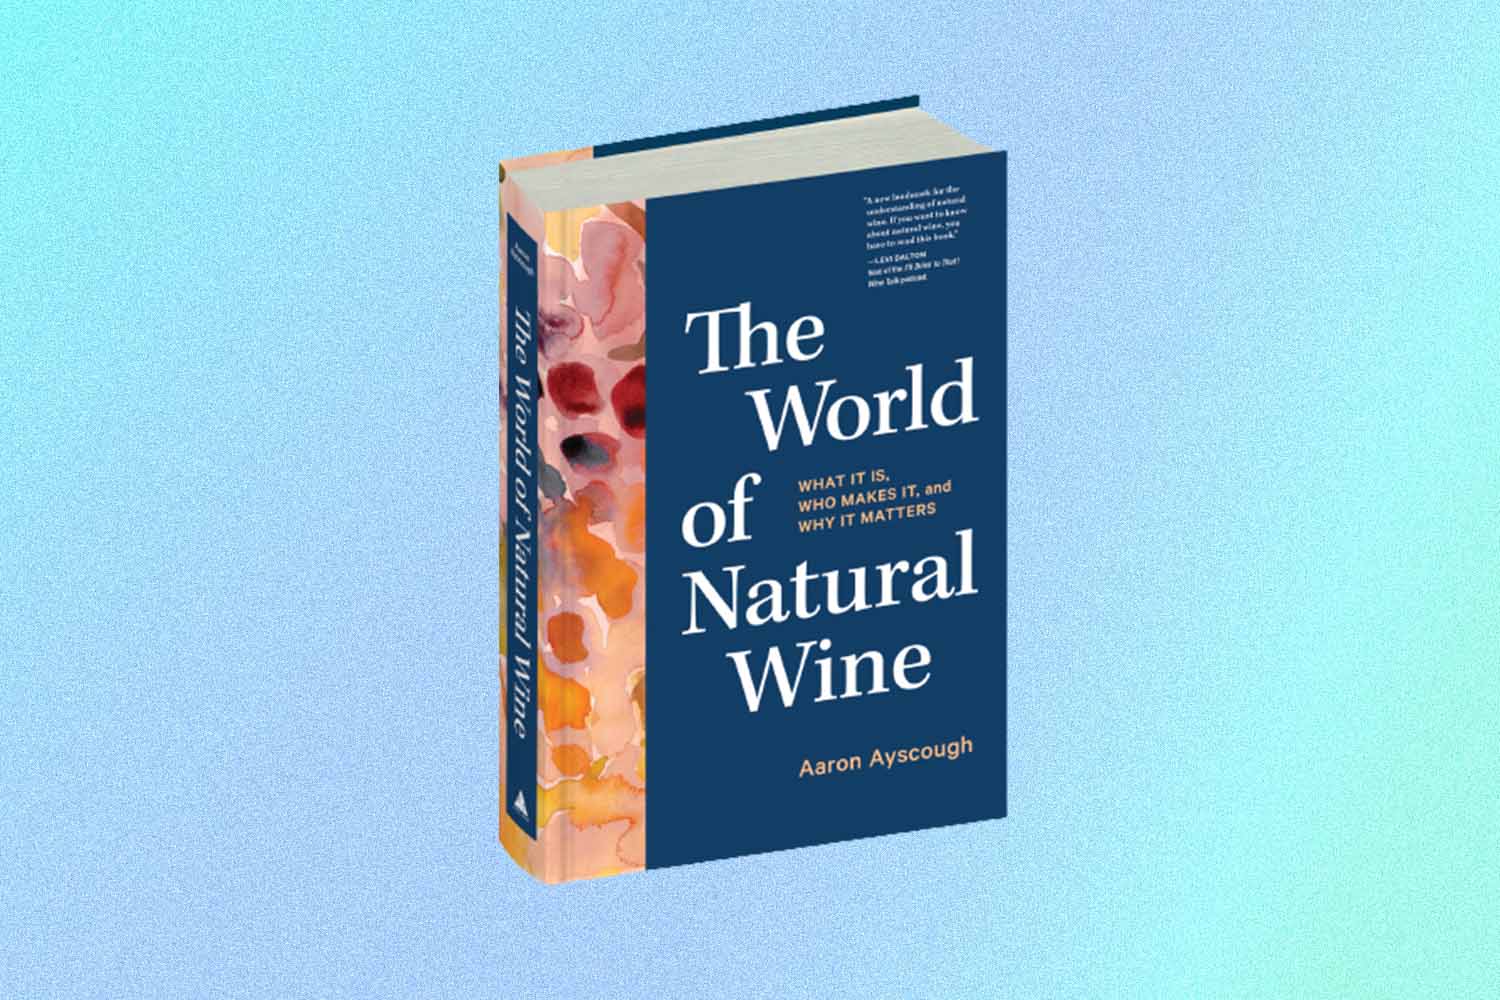 book cover of "The World of Natural Wine"